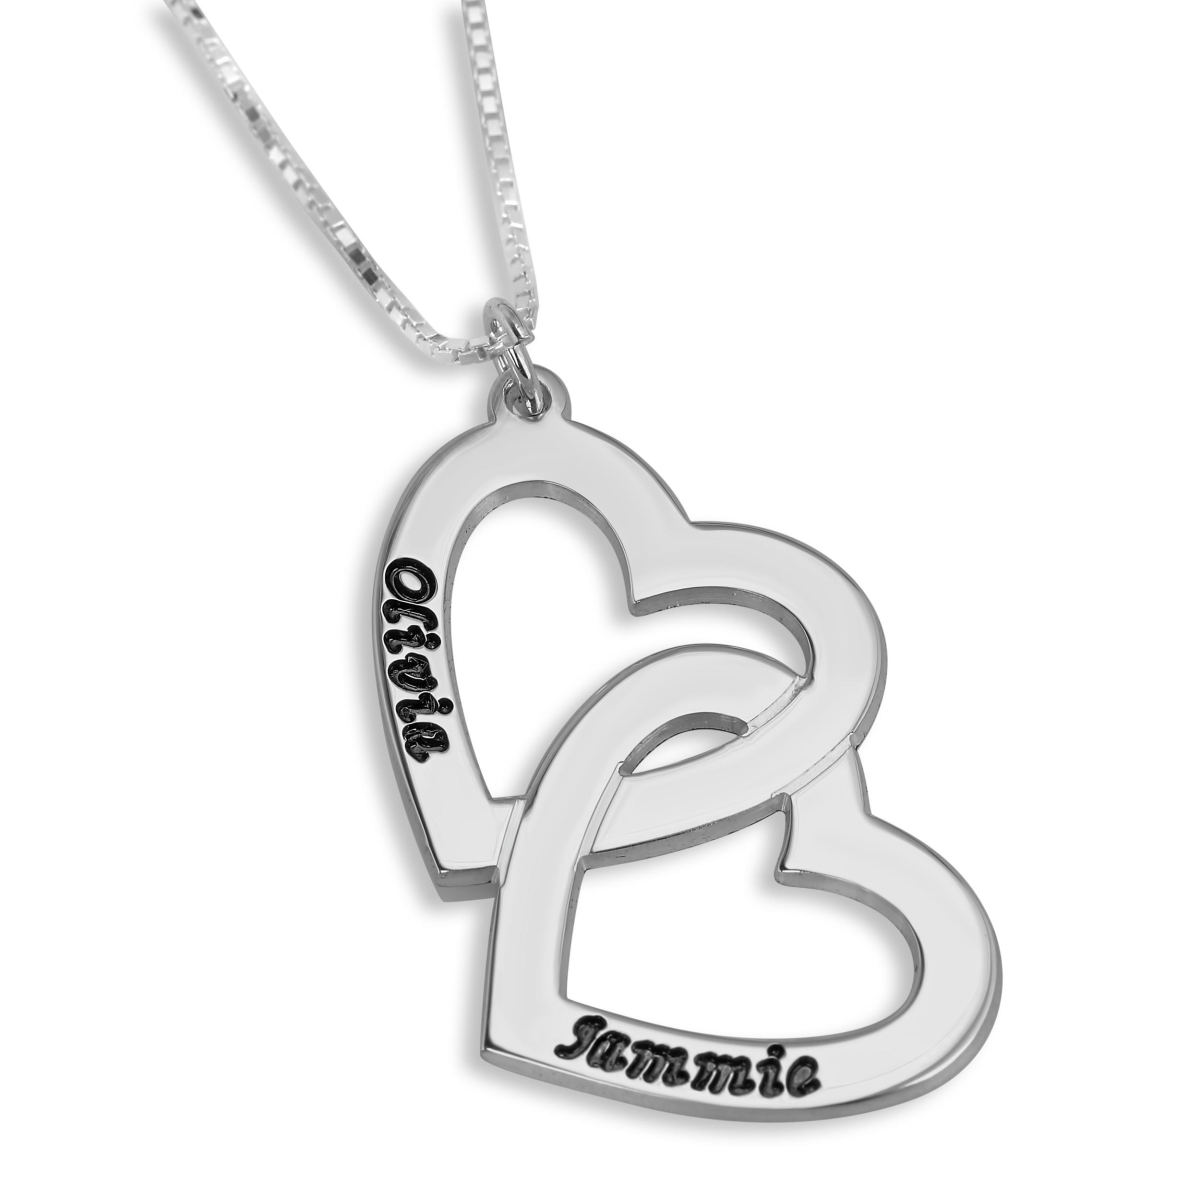 Linked Hearts Double Name Necklace, Sterling Silver, - 1